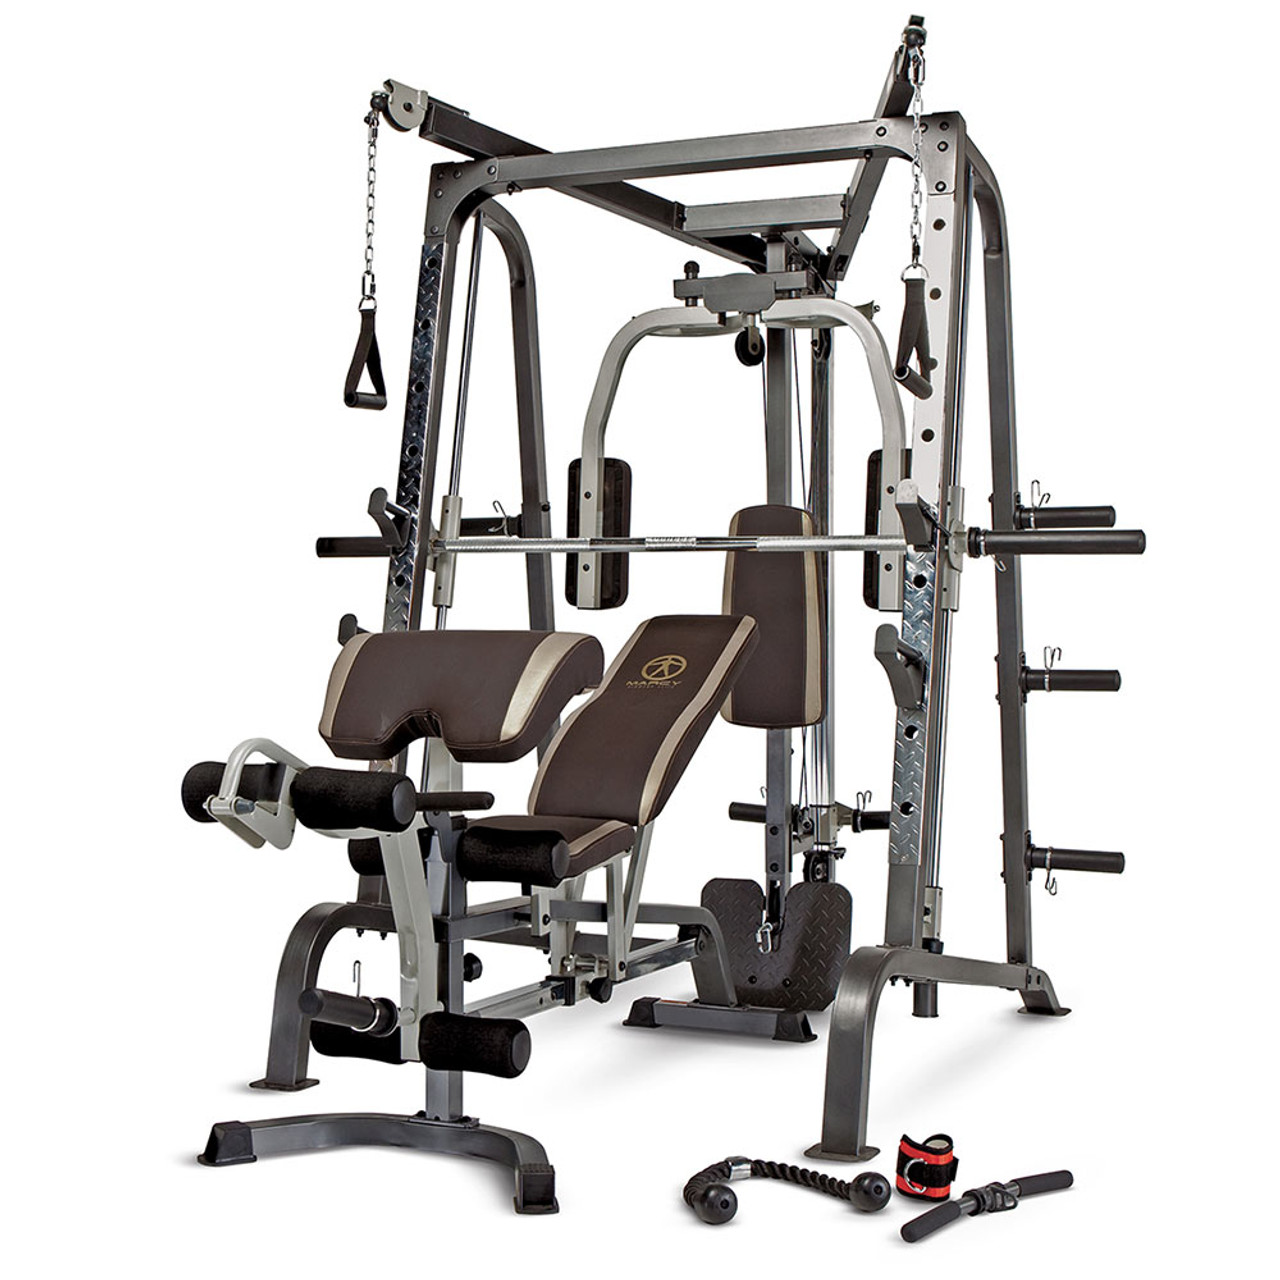 Weider Power Tower with Four Workout Stations and 300 lb. User Capacity